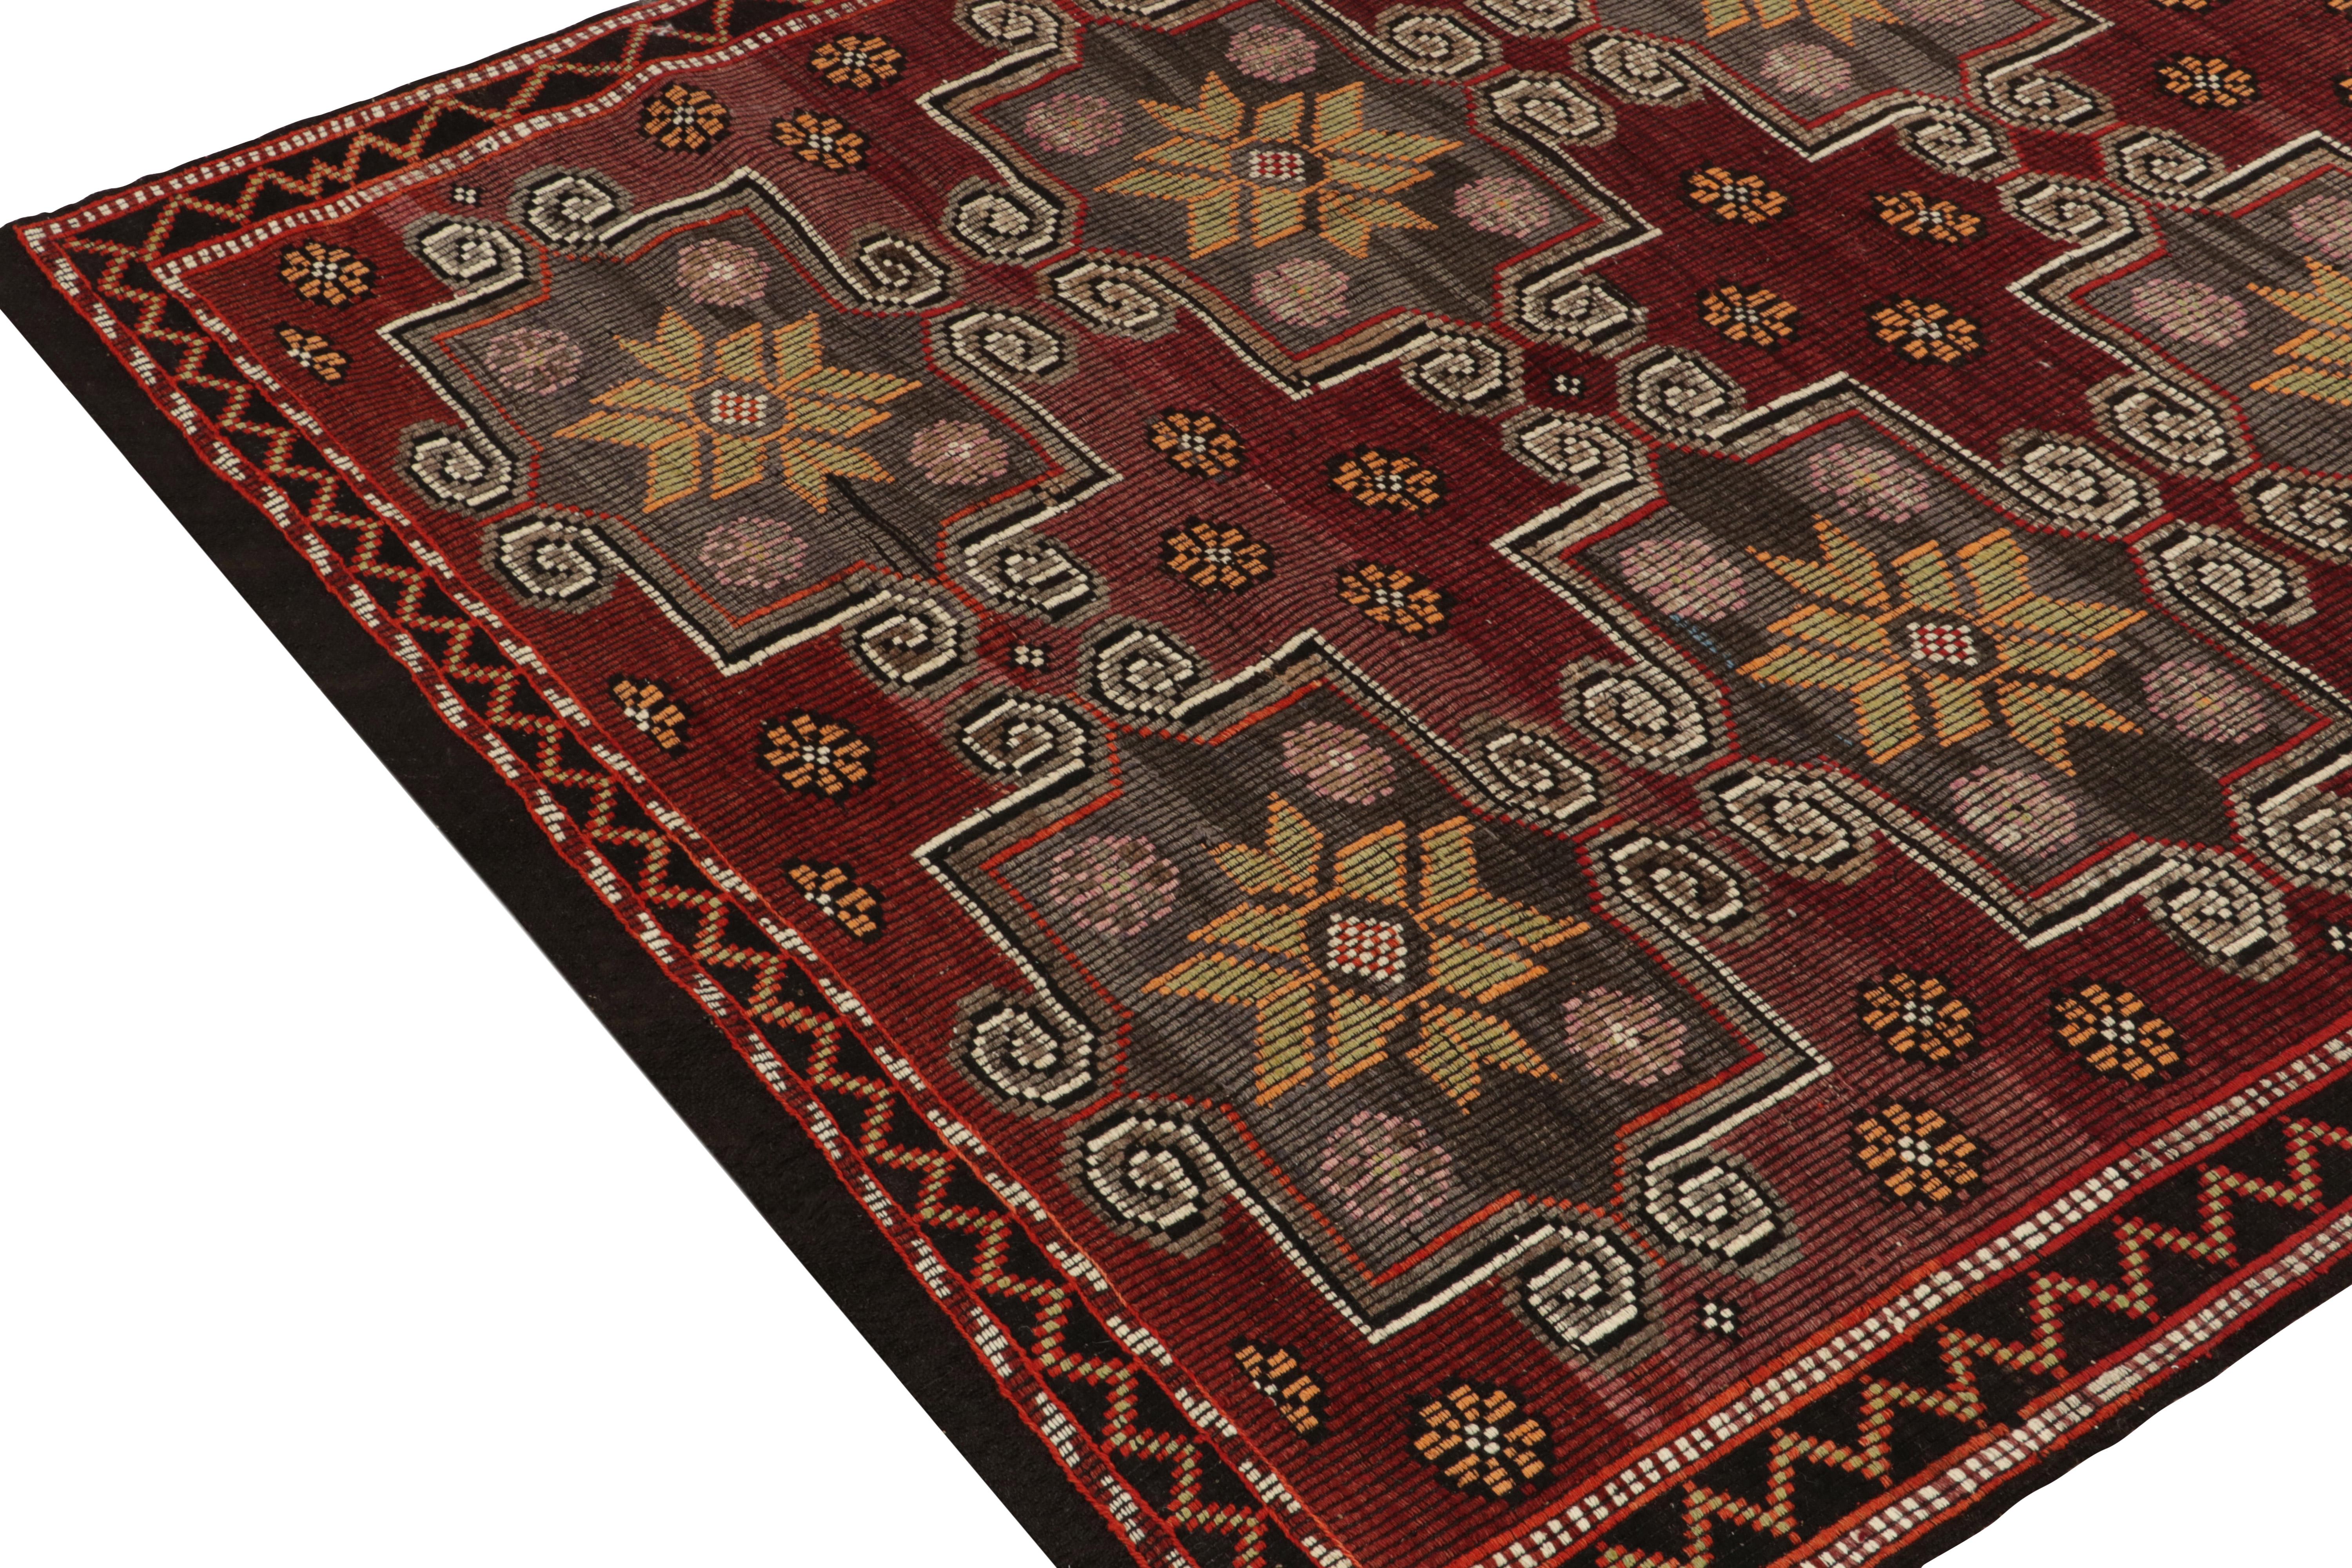 Hand-Knotted Vintage Chaput Kilim Rug in Red, Beige-Brown Geometric Floral by Rug & Kilim For Sale